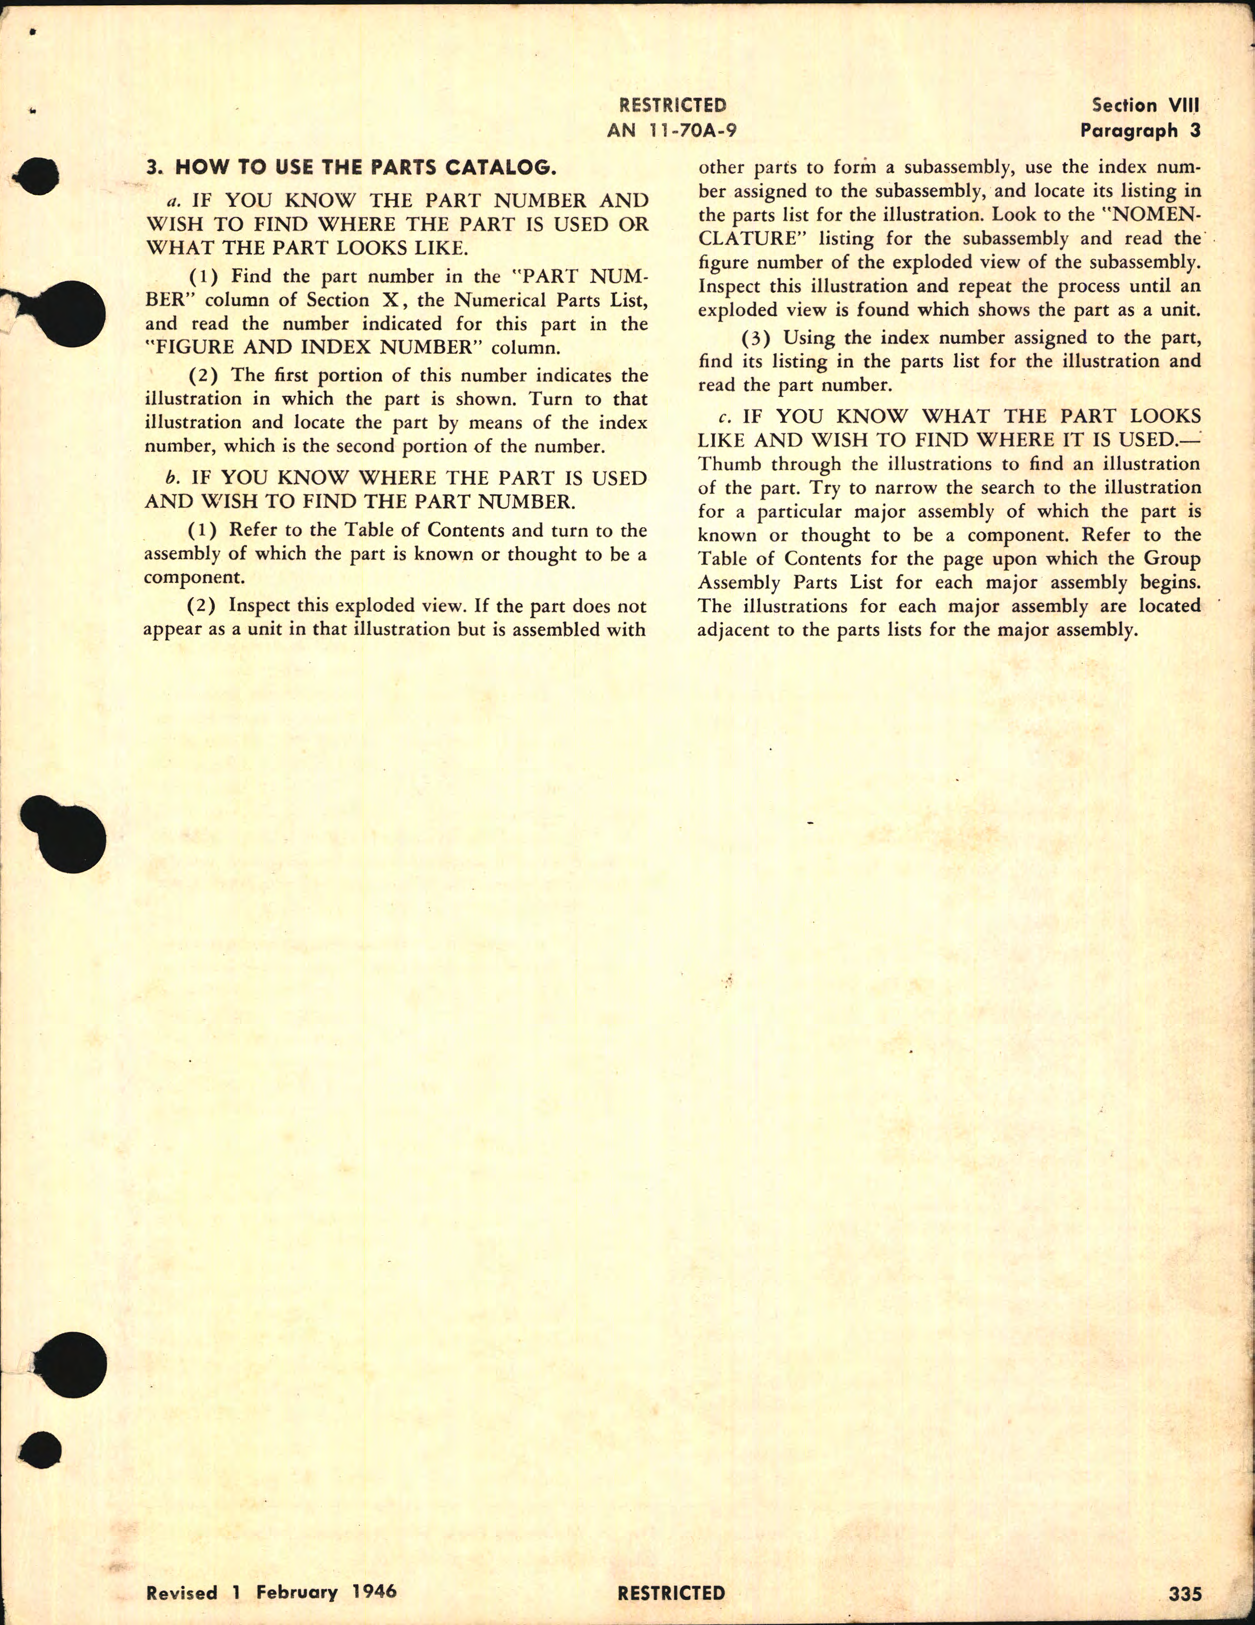 Sample page 5 from AirCorps Library document: Operation, Service, & Overhaul Instructions with Parts Catalog for Type CH Computer Models